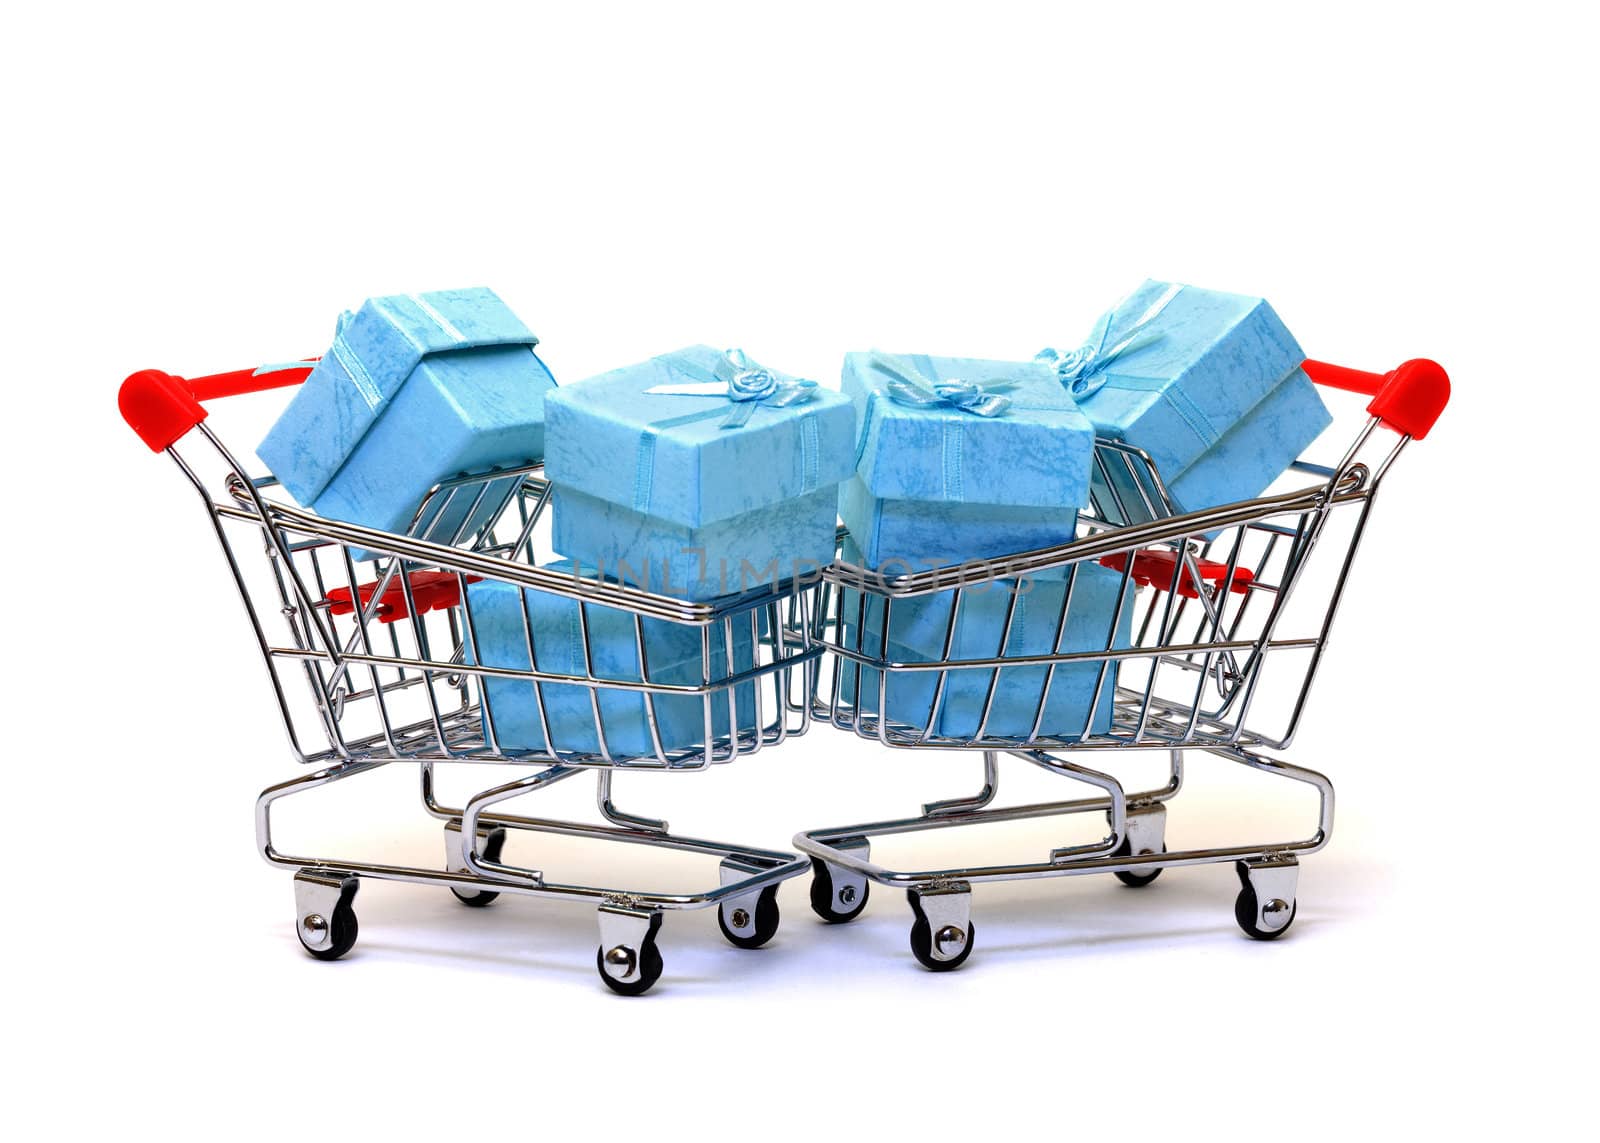 Cyan gift boxes in shopping carts on white background